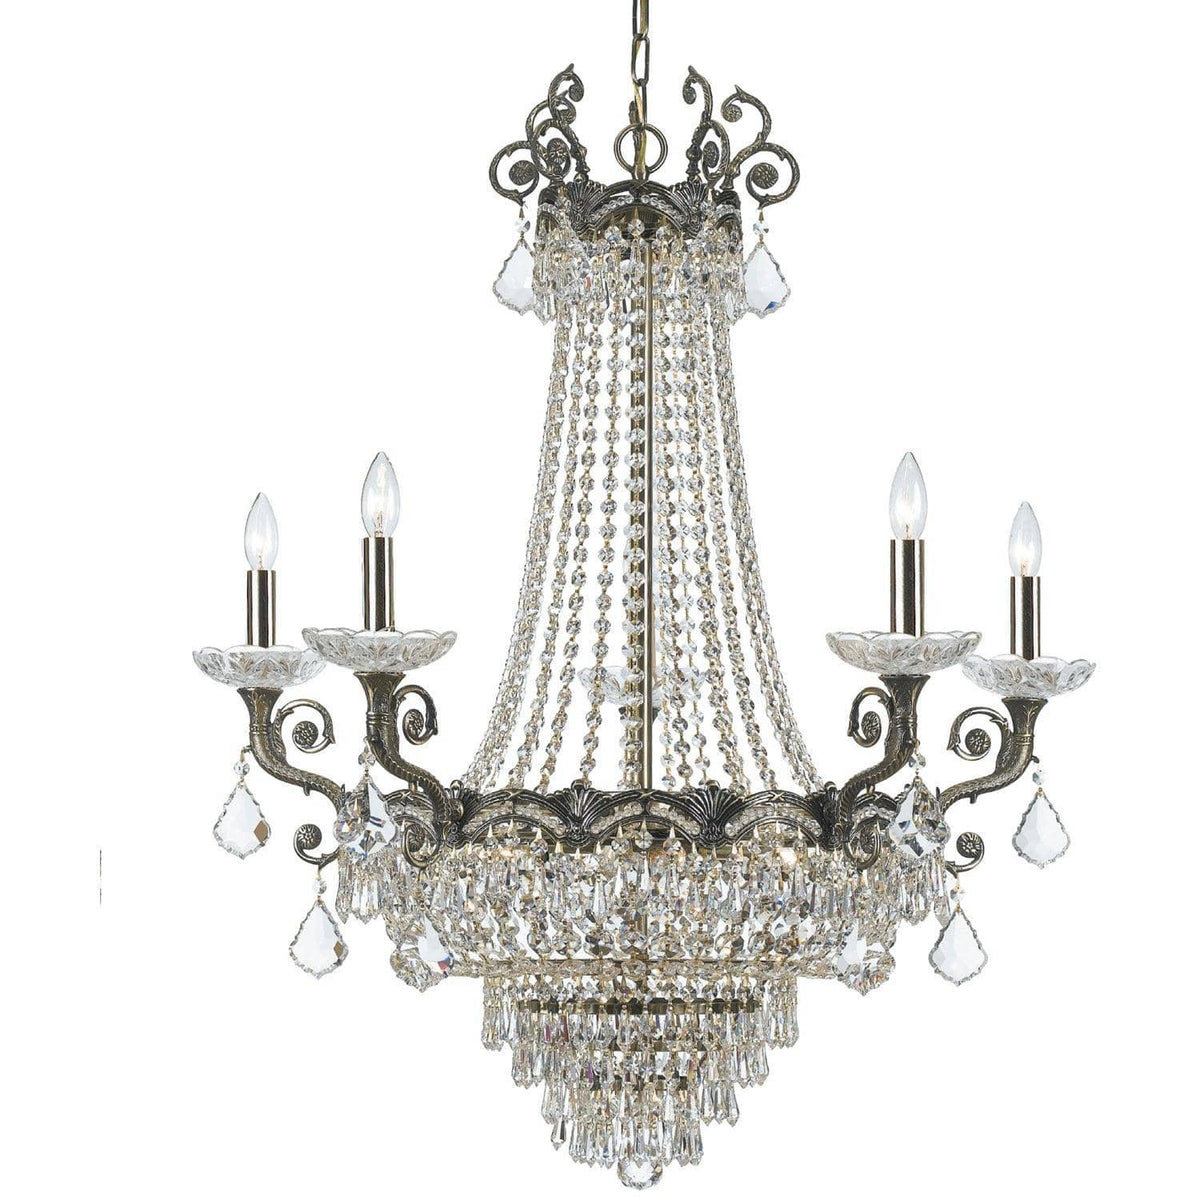 Crystorama - Majestic Chandelier - 1486-HB-CL-S | Montreal Lighting & Hardware